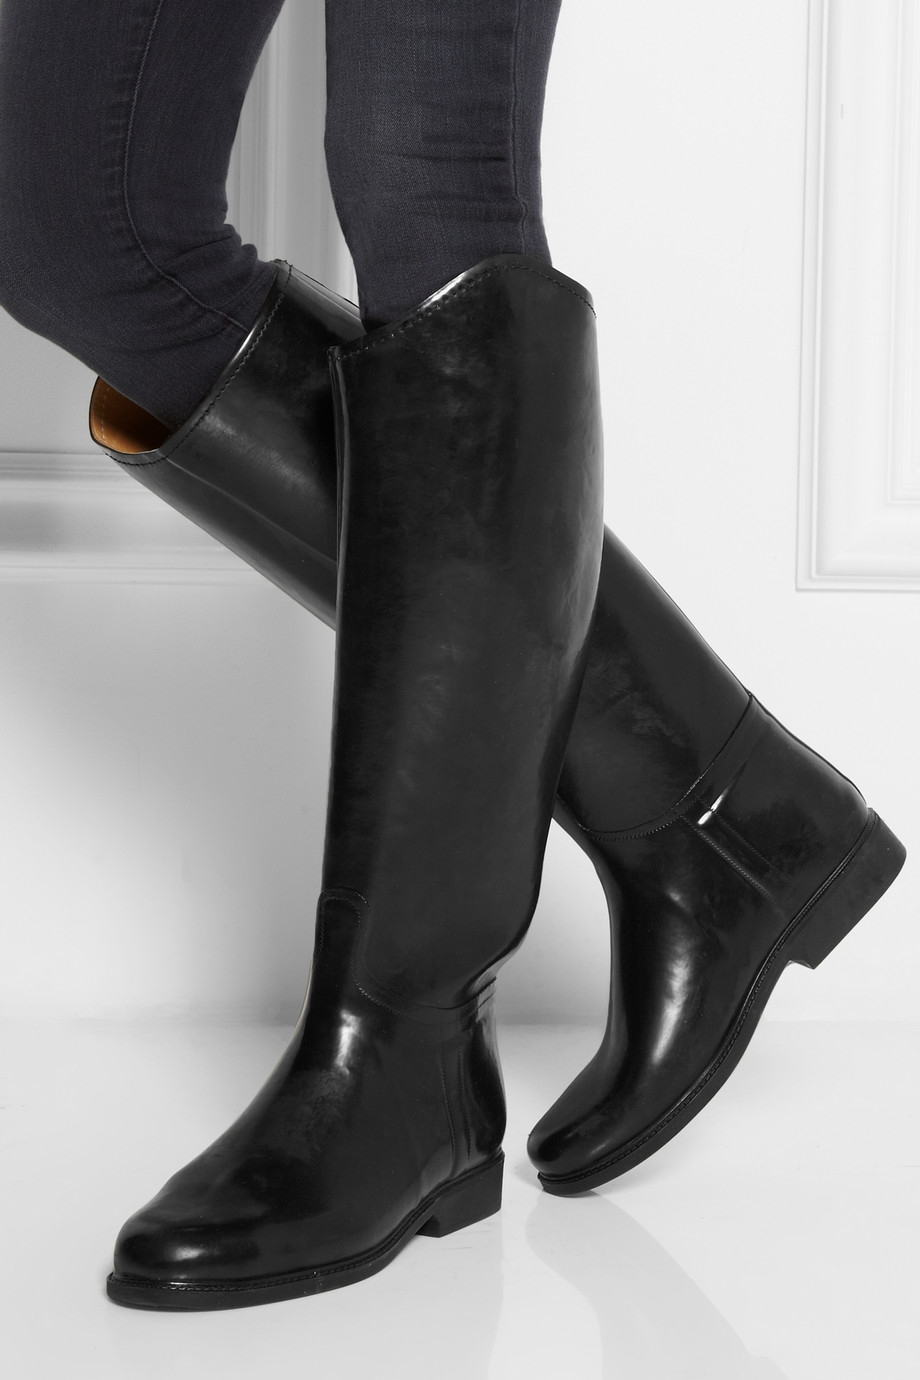 Le Chameau Alezan Leather-Lined Rubber Riding Boots in Black | Lyst